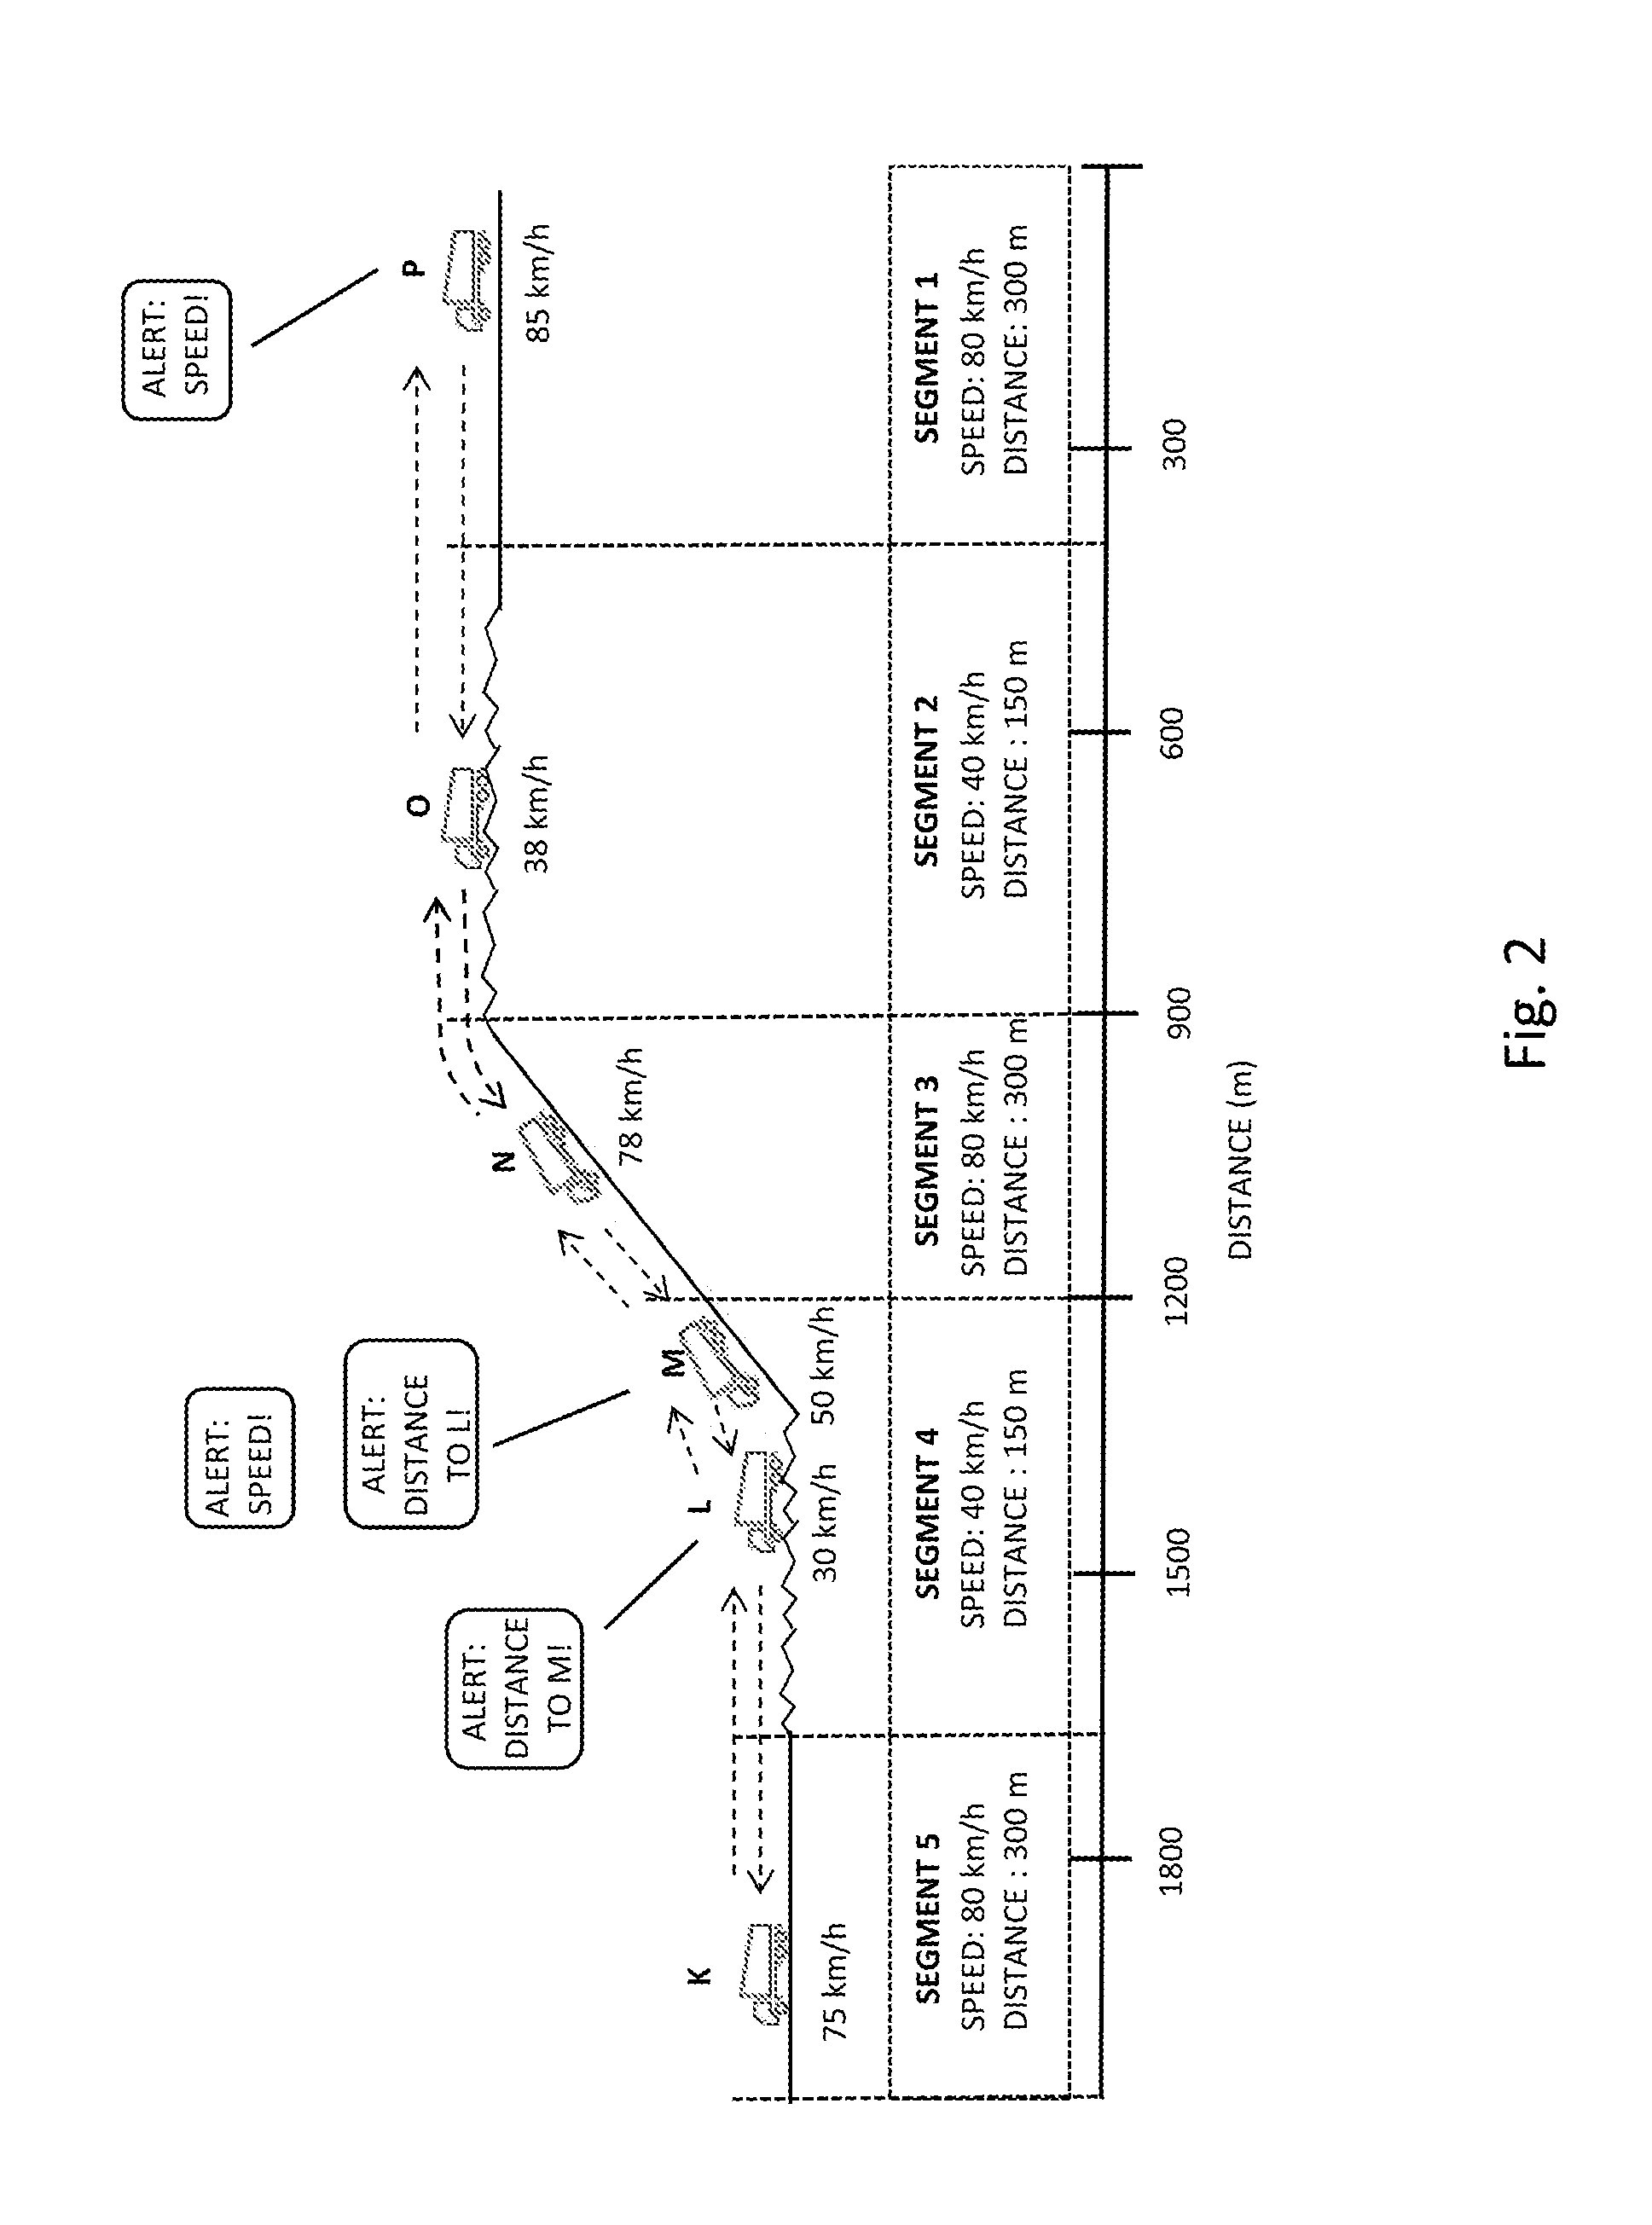 Self-monitoring of vehicles in a convoy